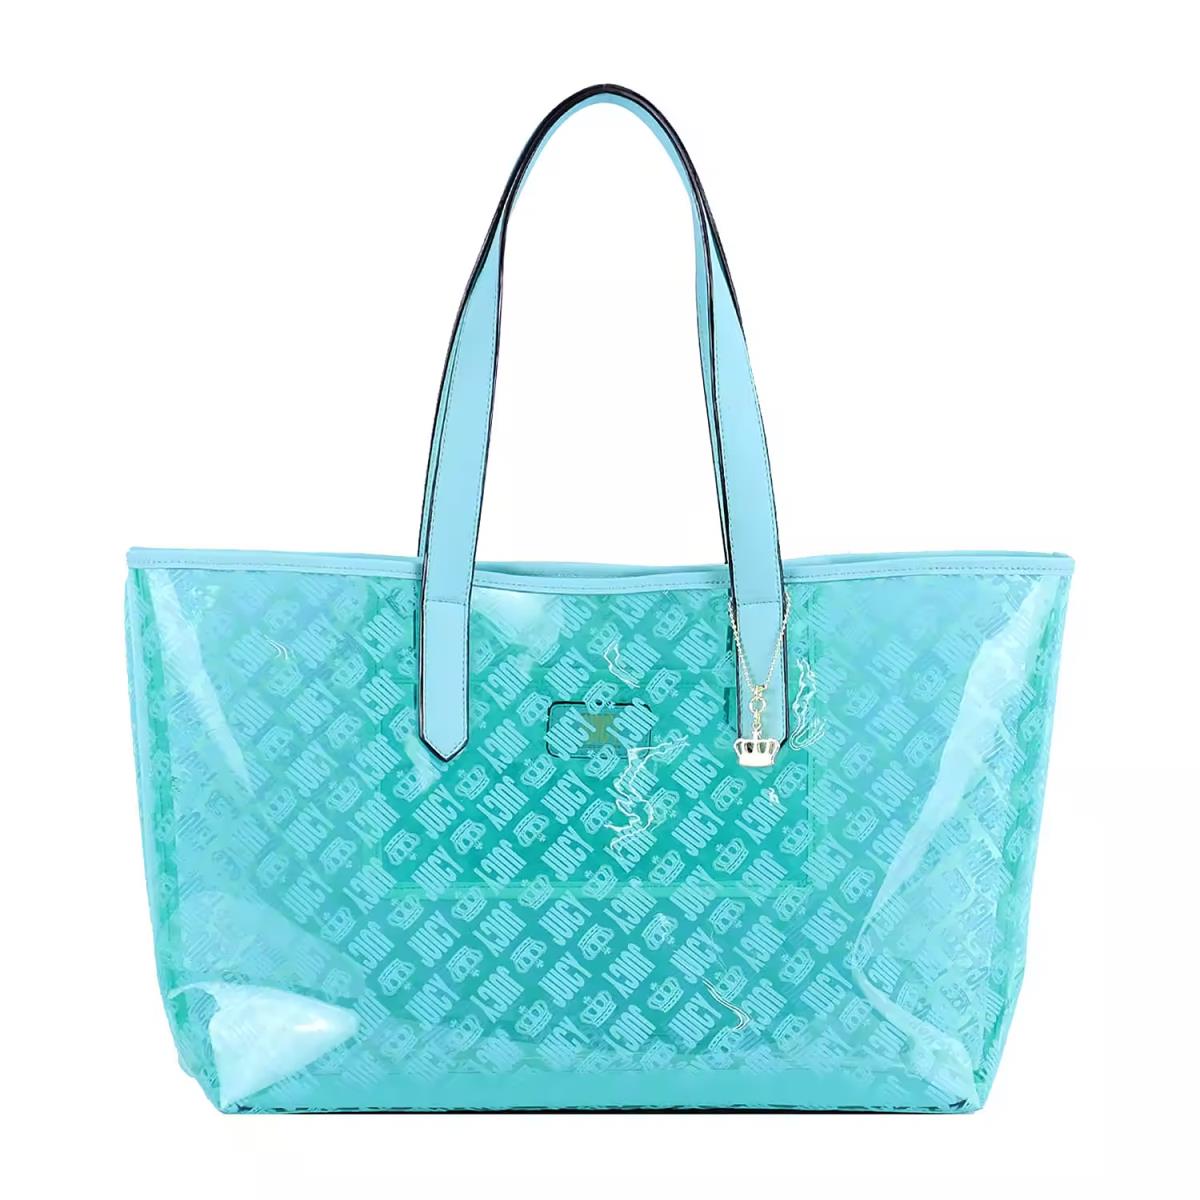 Juicy Couture Large Beach Tote Bag Clear Aqua Logo Package